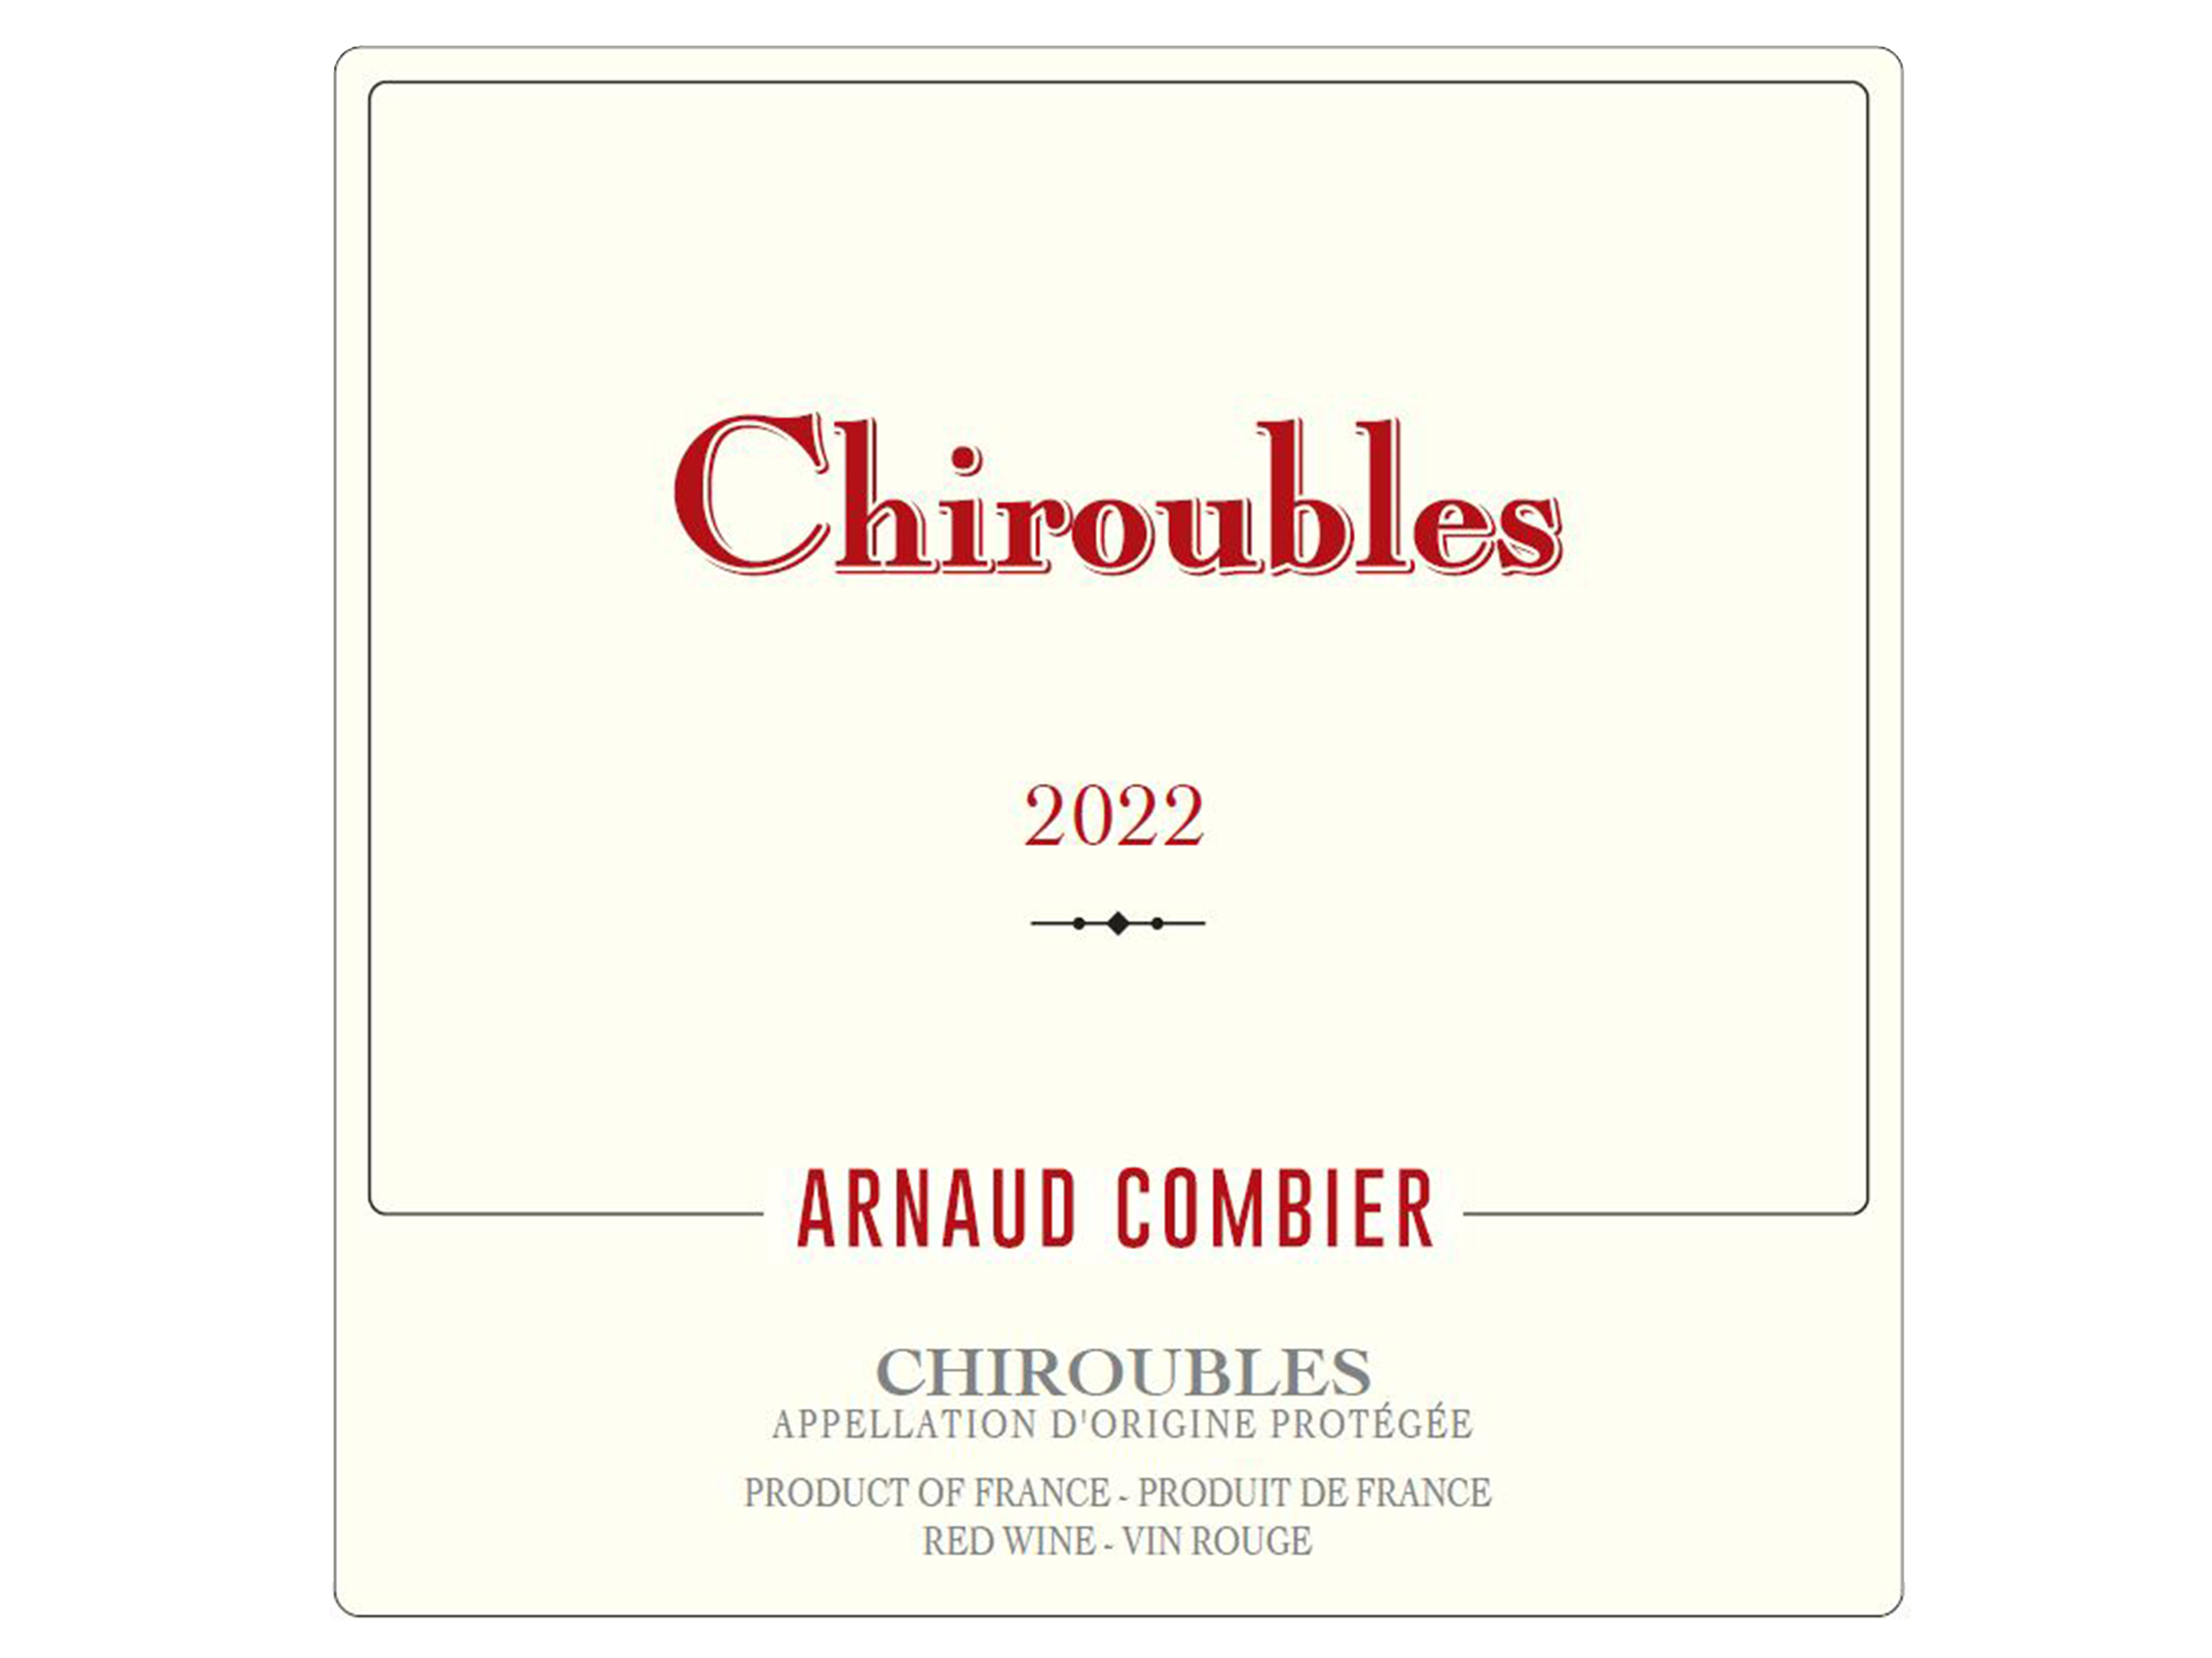 Chiroubles 2022